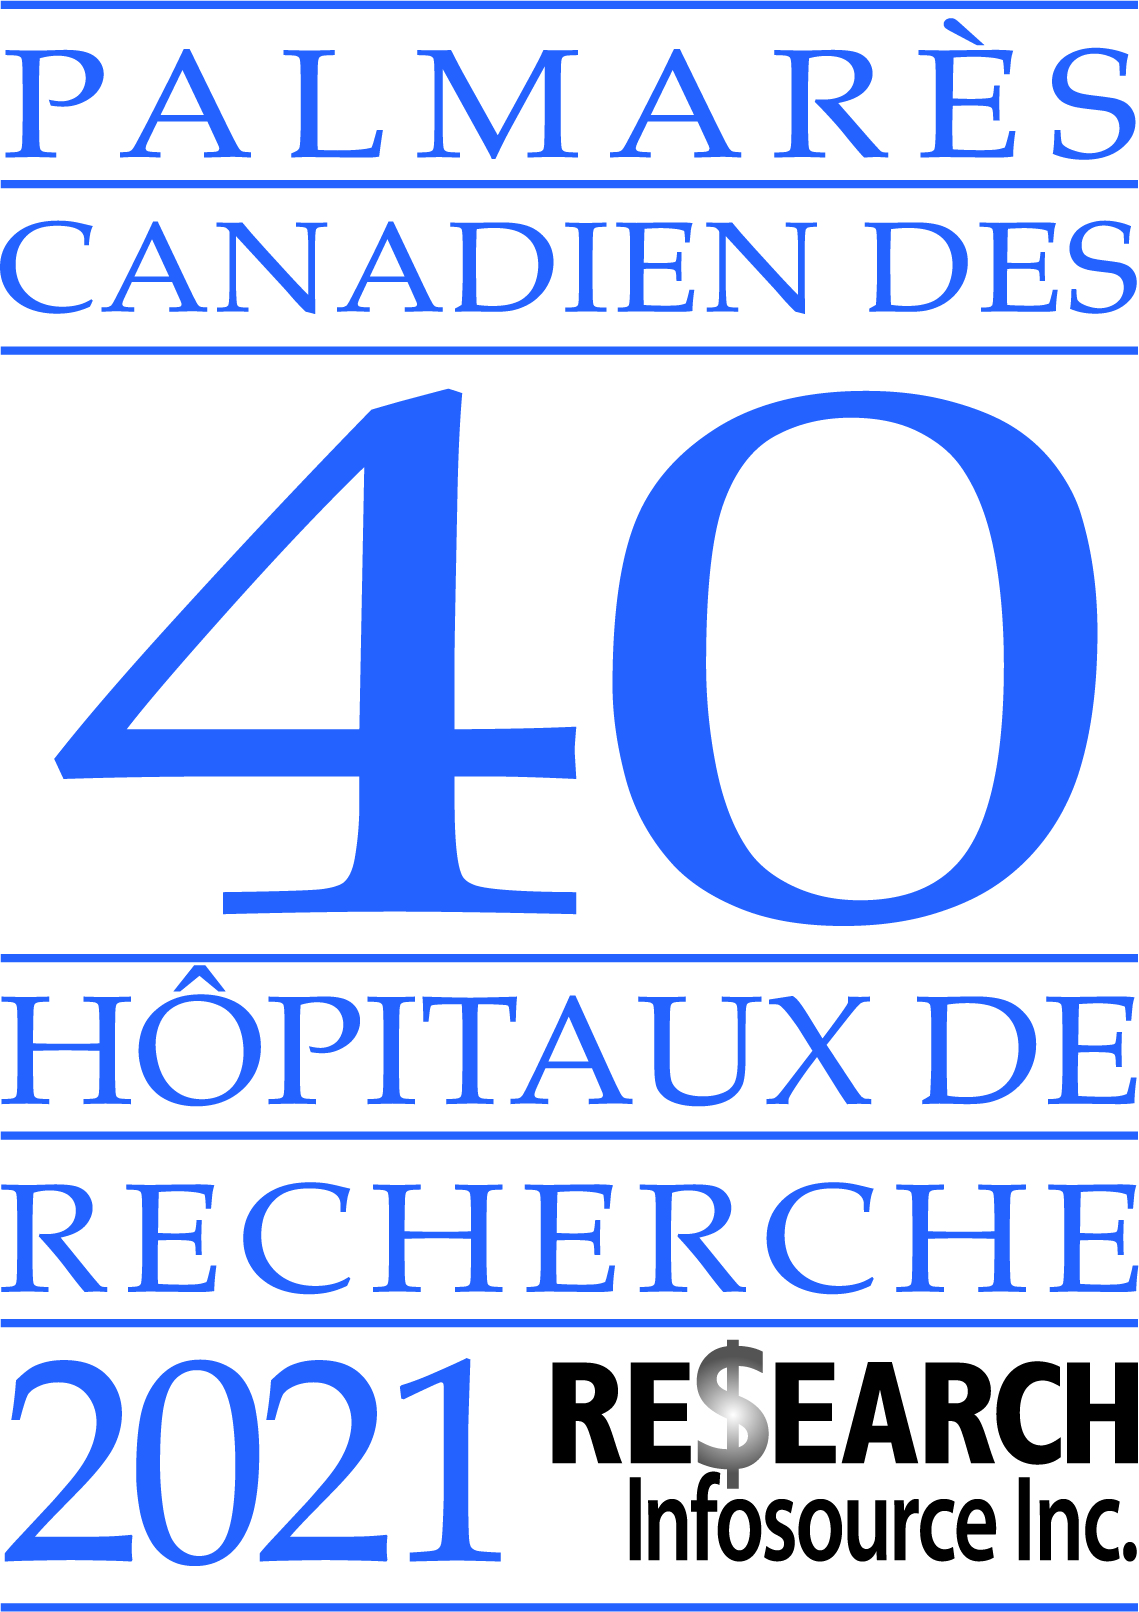 Canadian top 40 research hospital list 2018